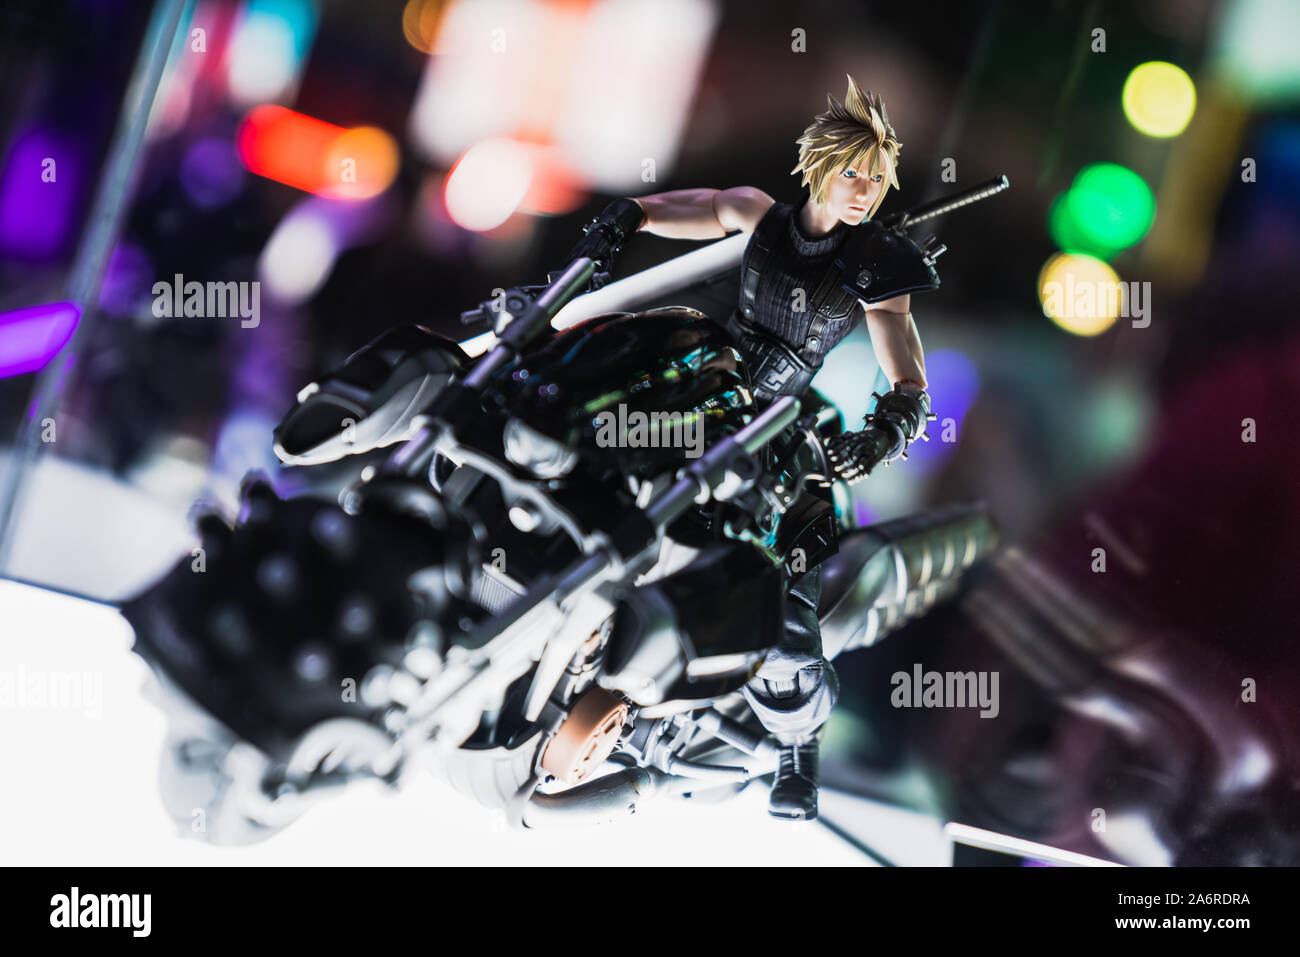 Bangkok, Thailand - Oct 25, 2019: Cloud Strife and motorbike figure model display in Thailand game show (TGS) 2019. Final Fantasy VII Remake pre-order Stock Photo